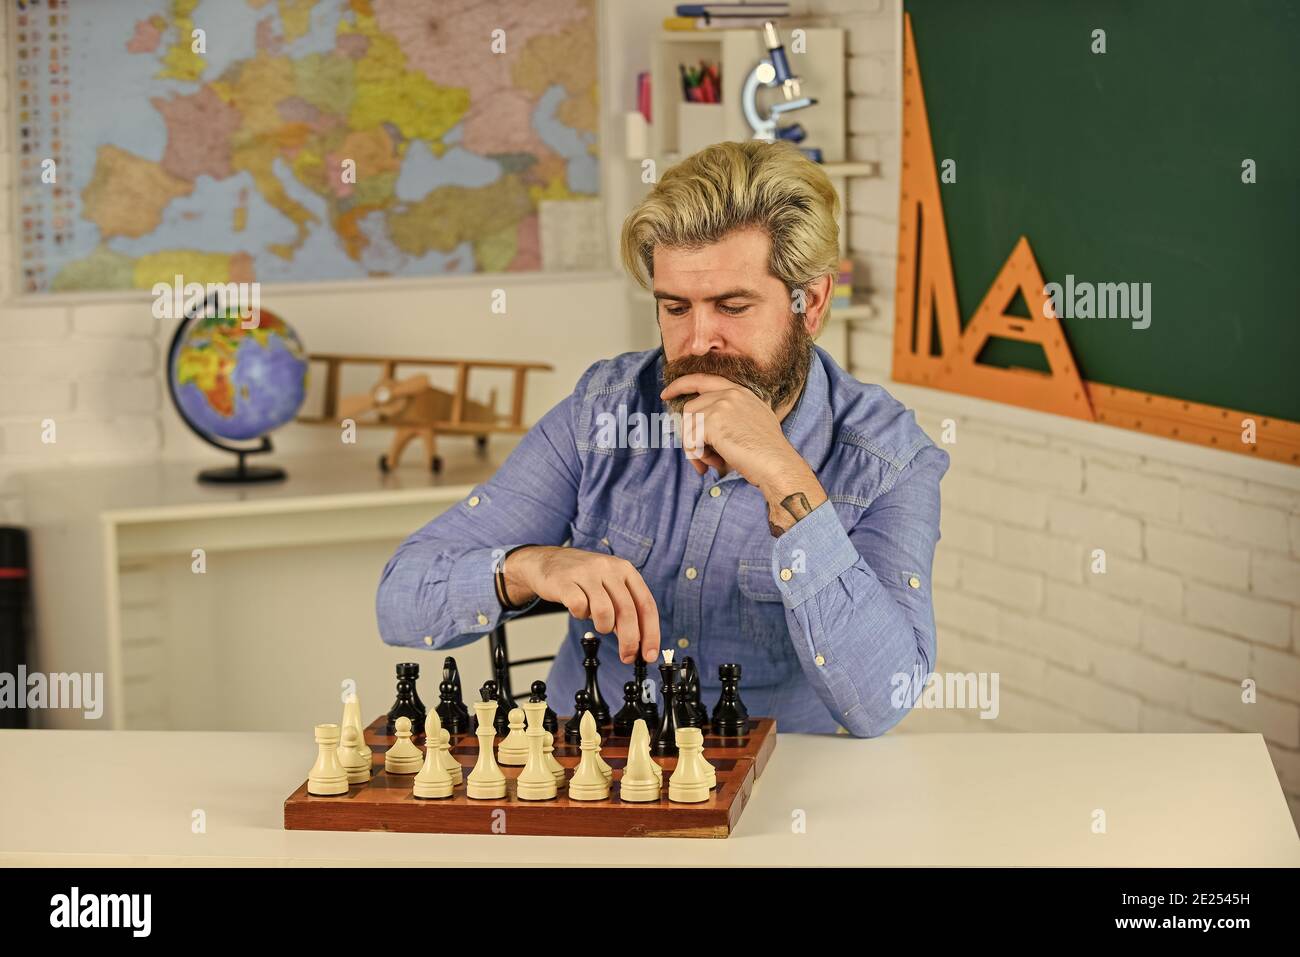 Chess is gymnasium of mind. Chess lesson. Strategy concept. School teacher.  Board game. Smart hipster man playing chess. Intellectual hobby. Figures on  wooden chess board. Thinking about next step Stock Photo -